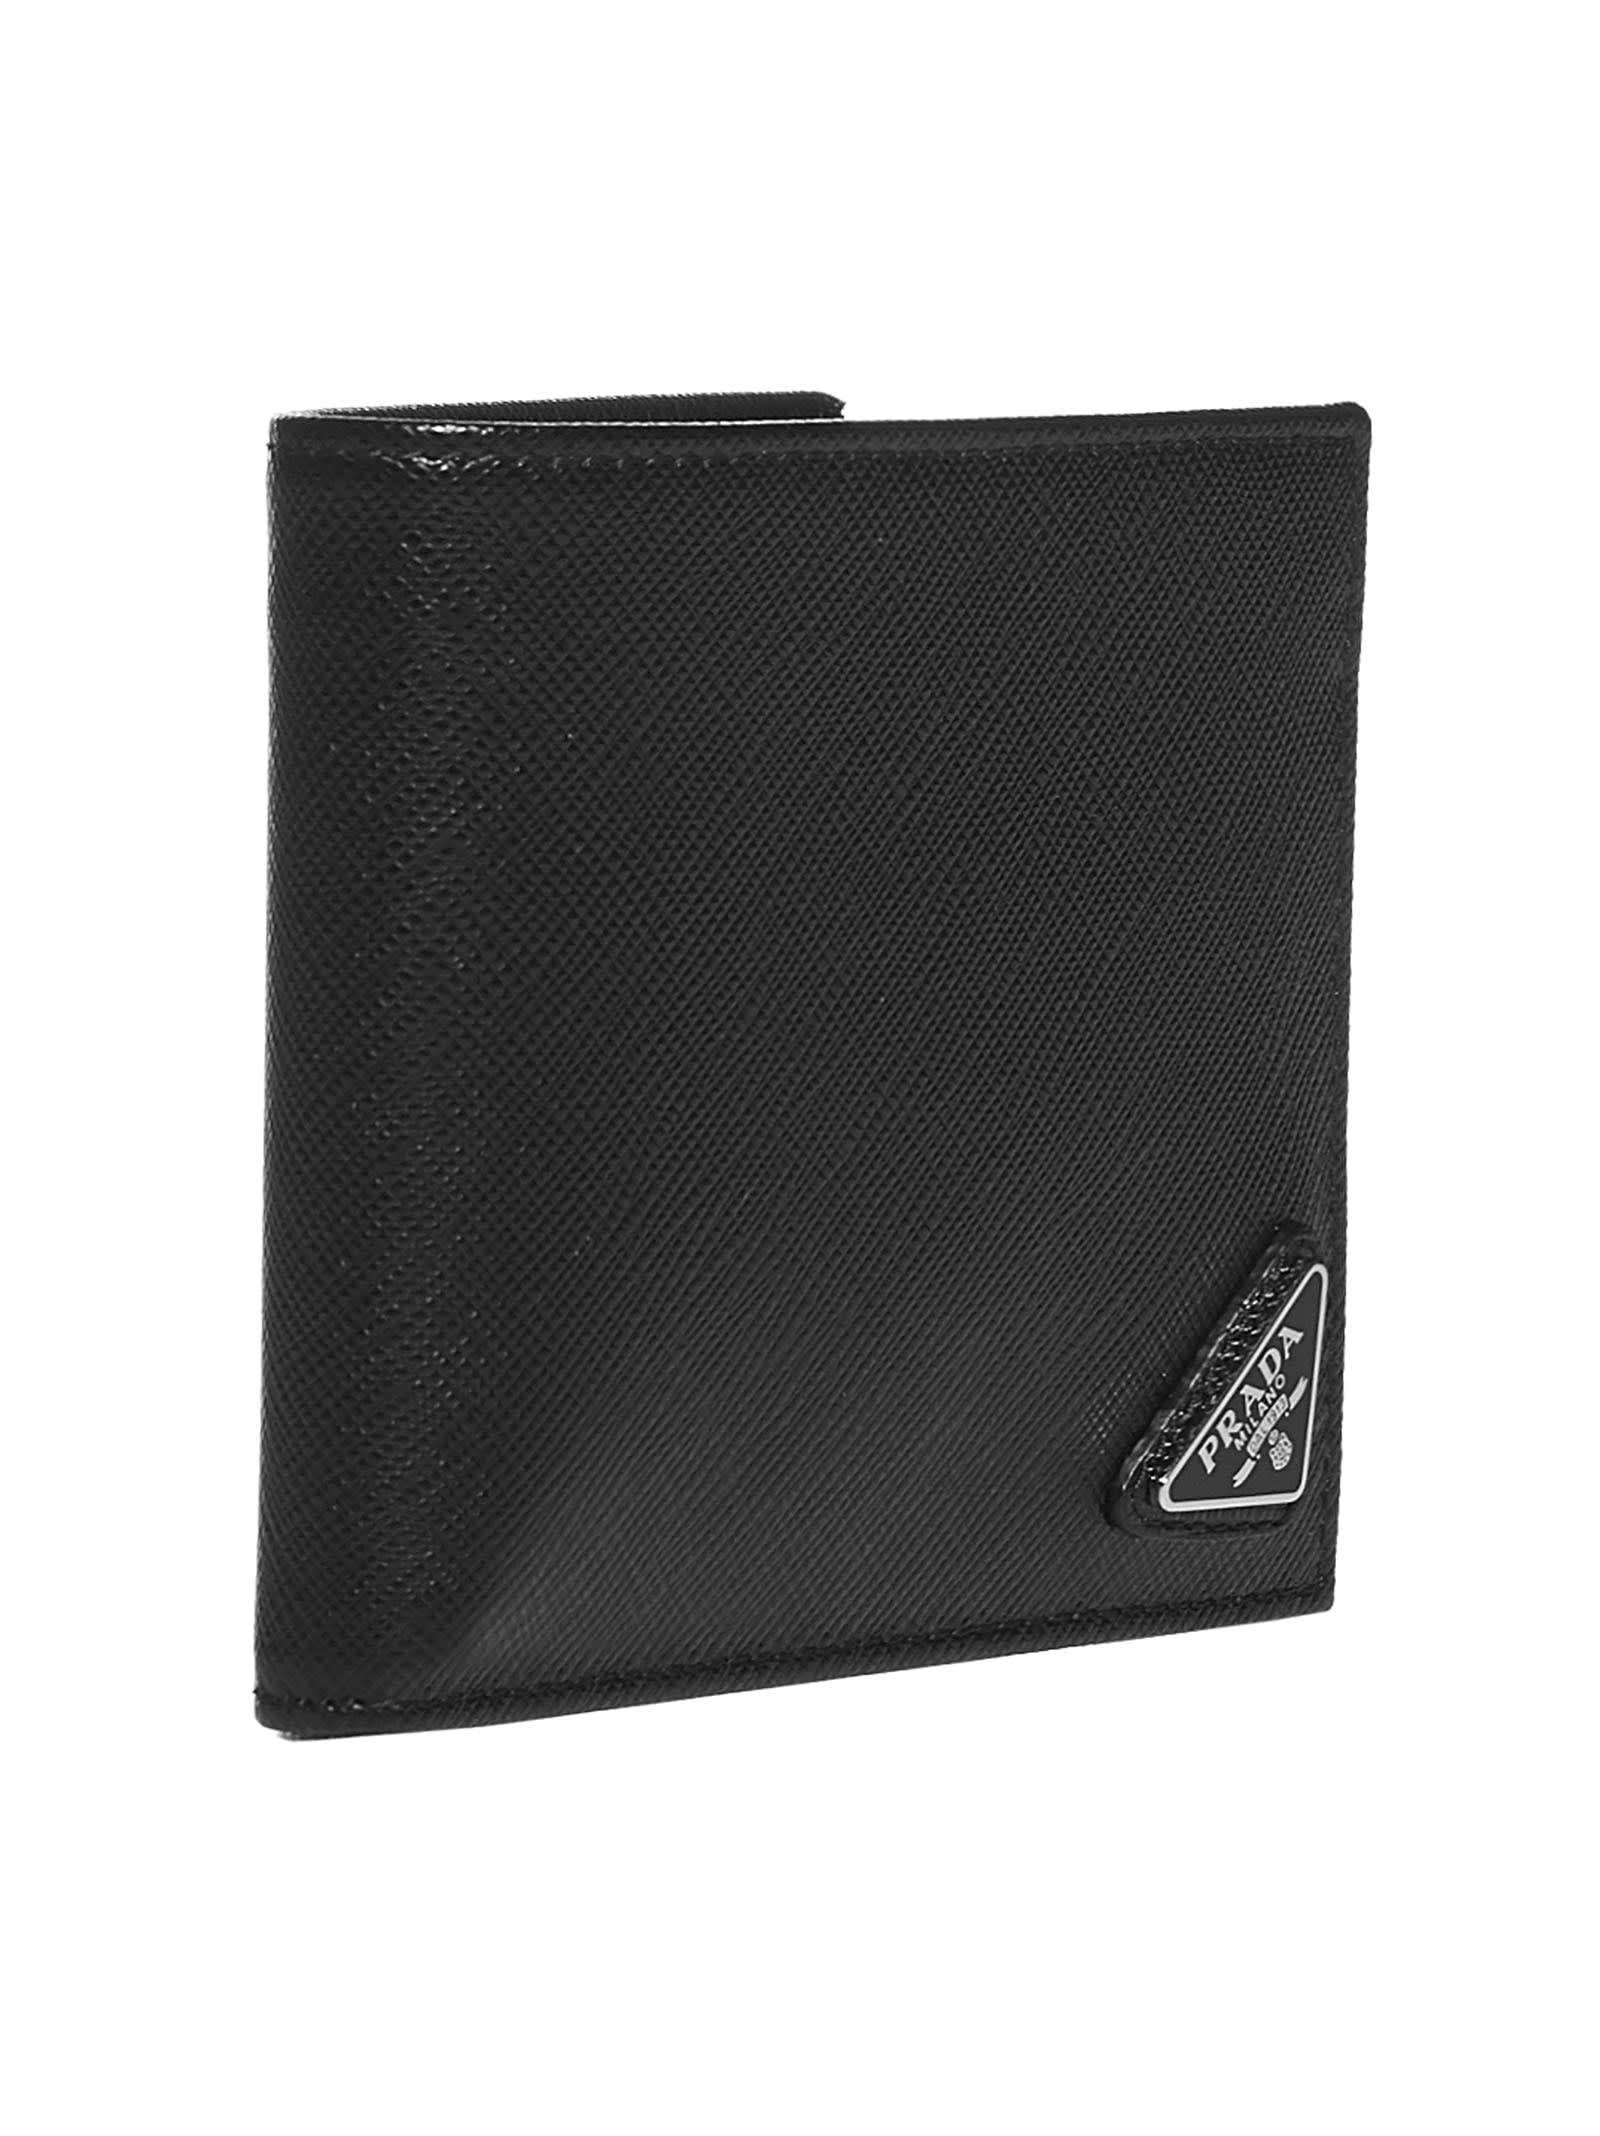 Prada Saffiano Leather Bifold Wallet in Black for Men - Save 39% | Lyst